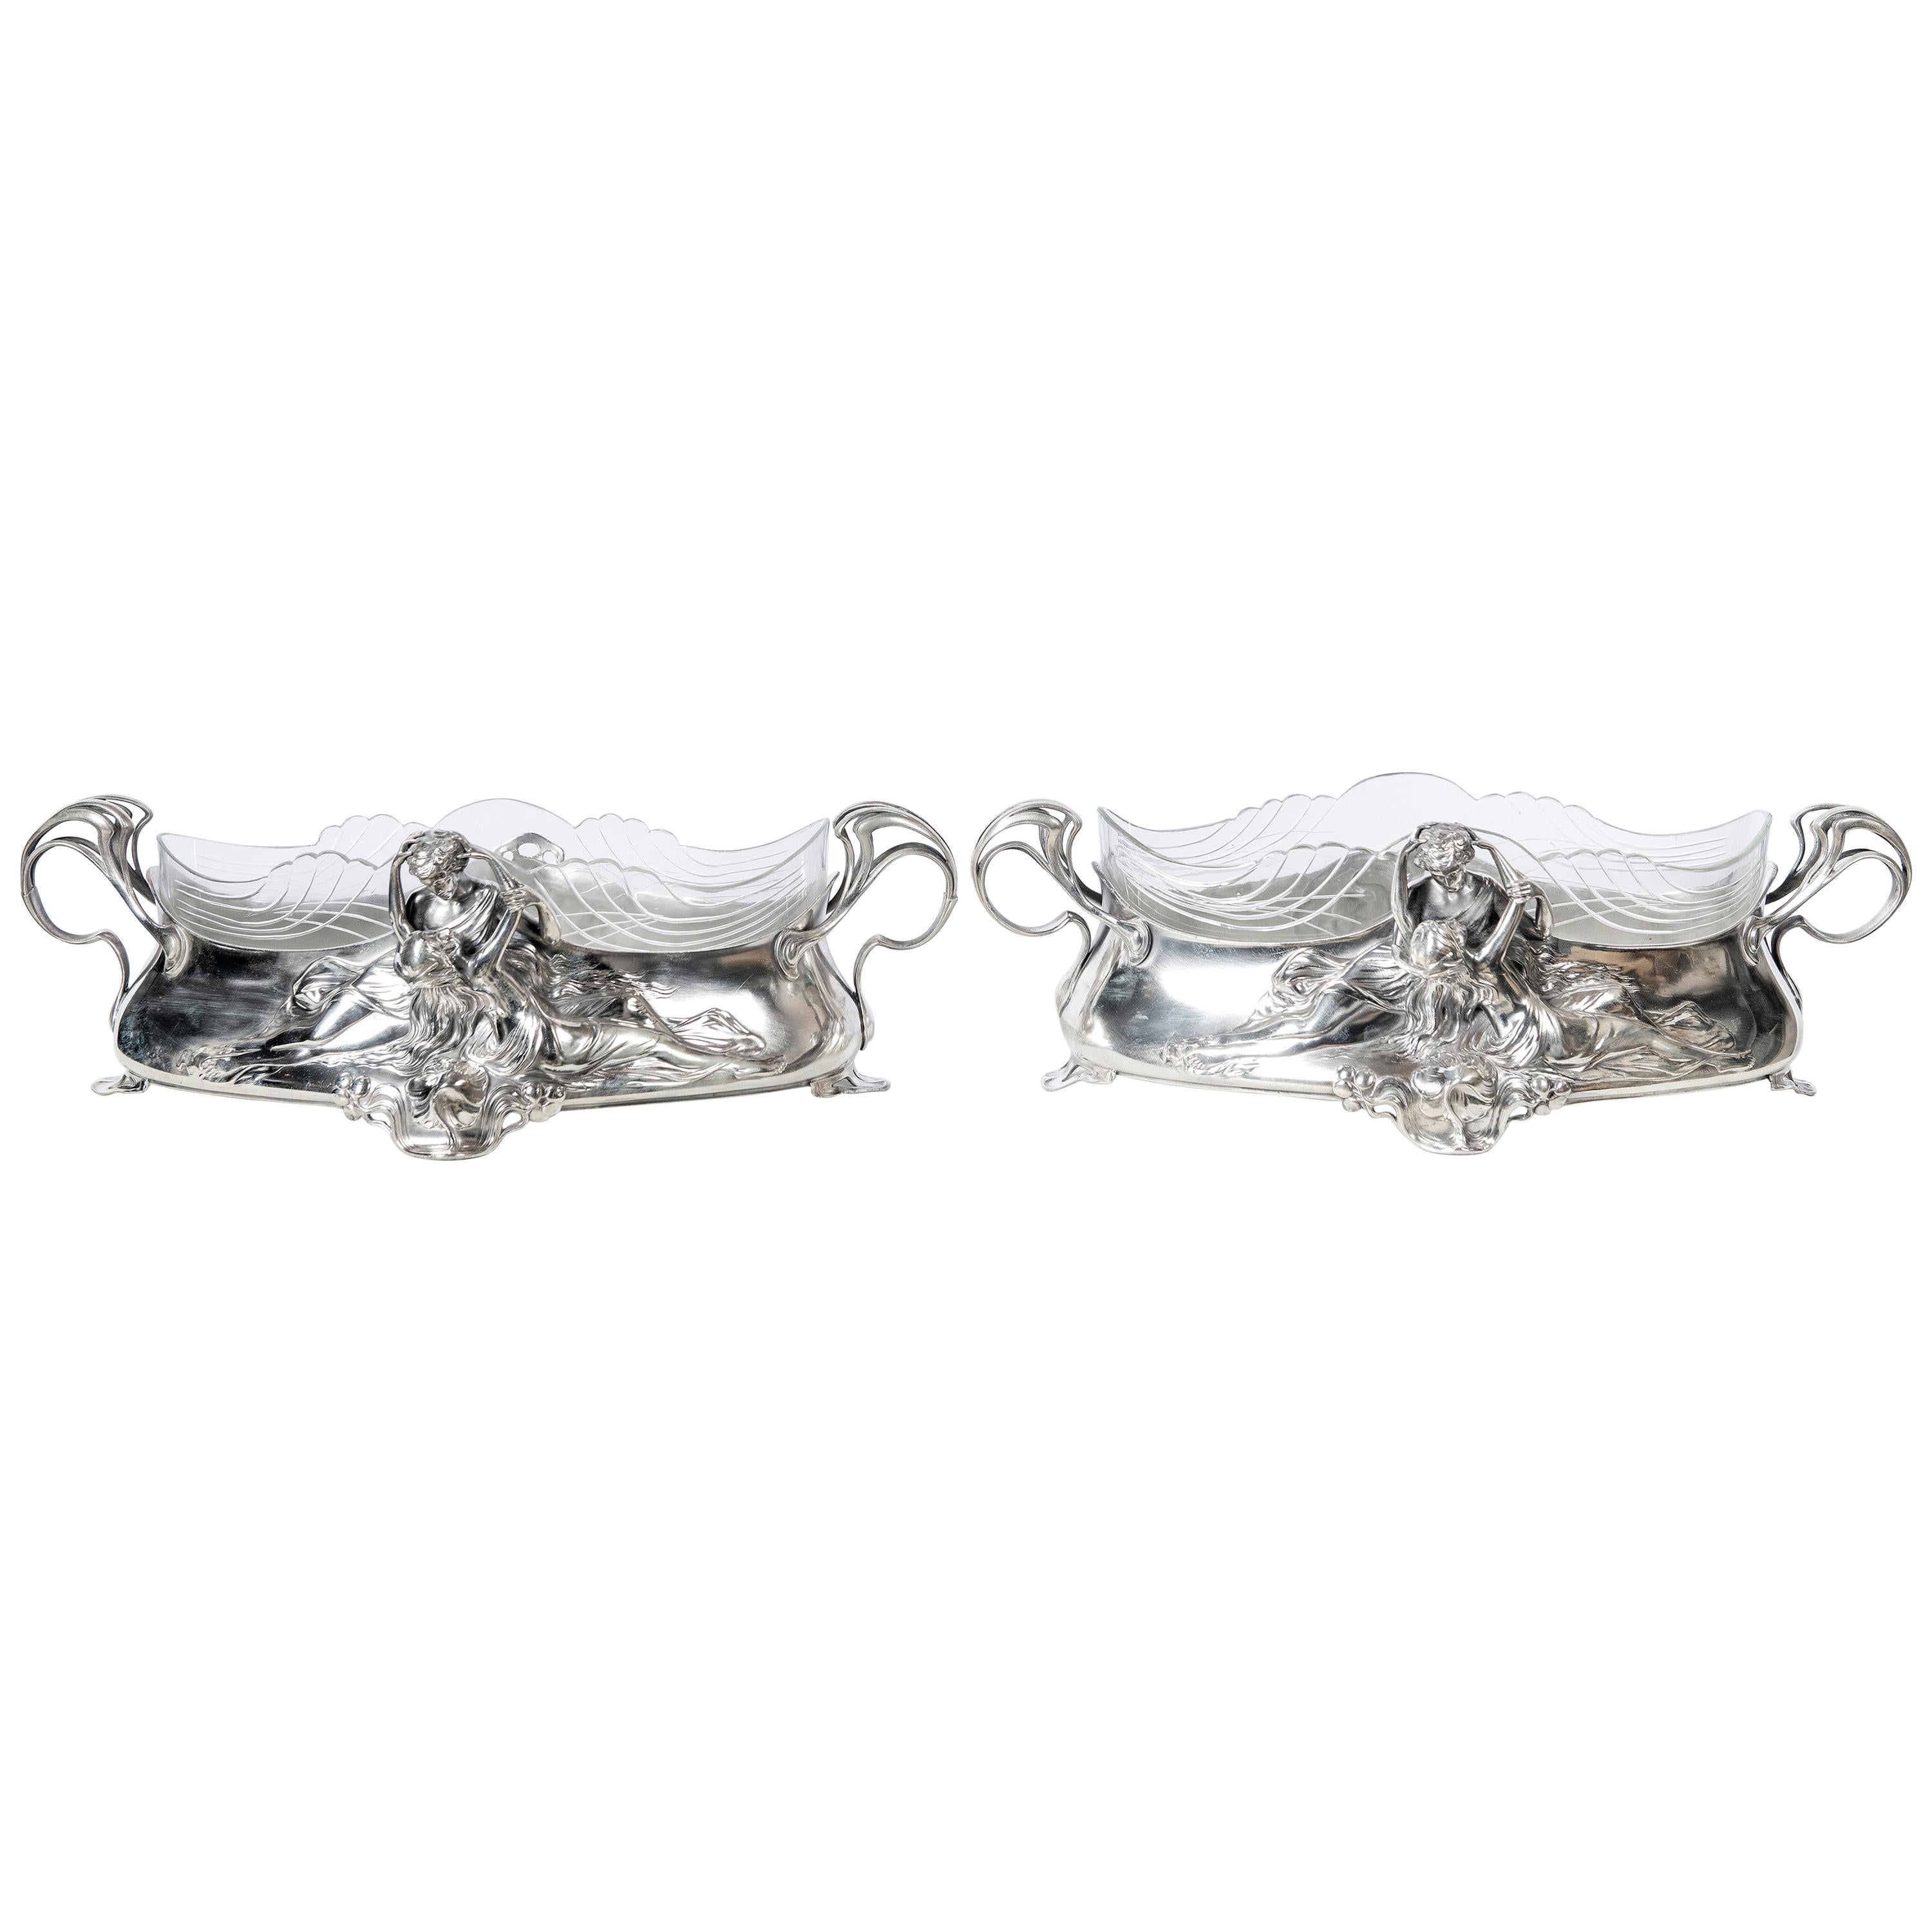 Pair of W.M.F. Silver Plate Jardinière, Jugendstil Style, Germany, circa 1900 For Sale